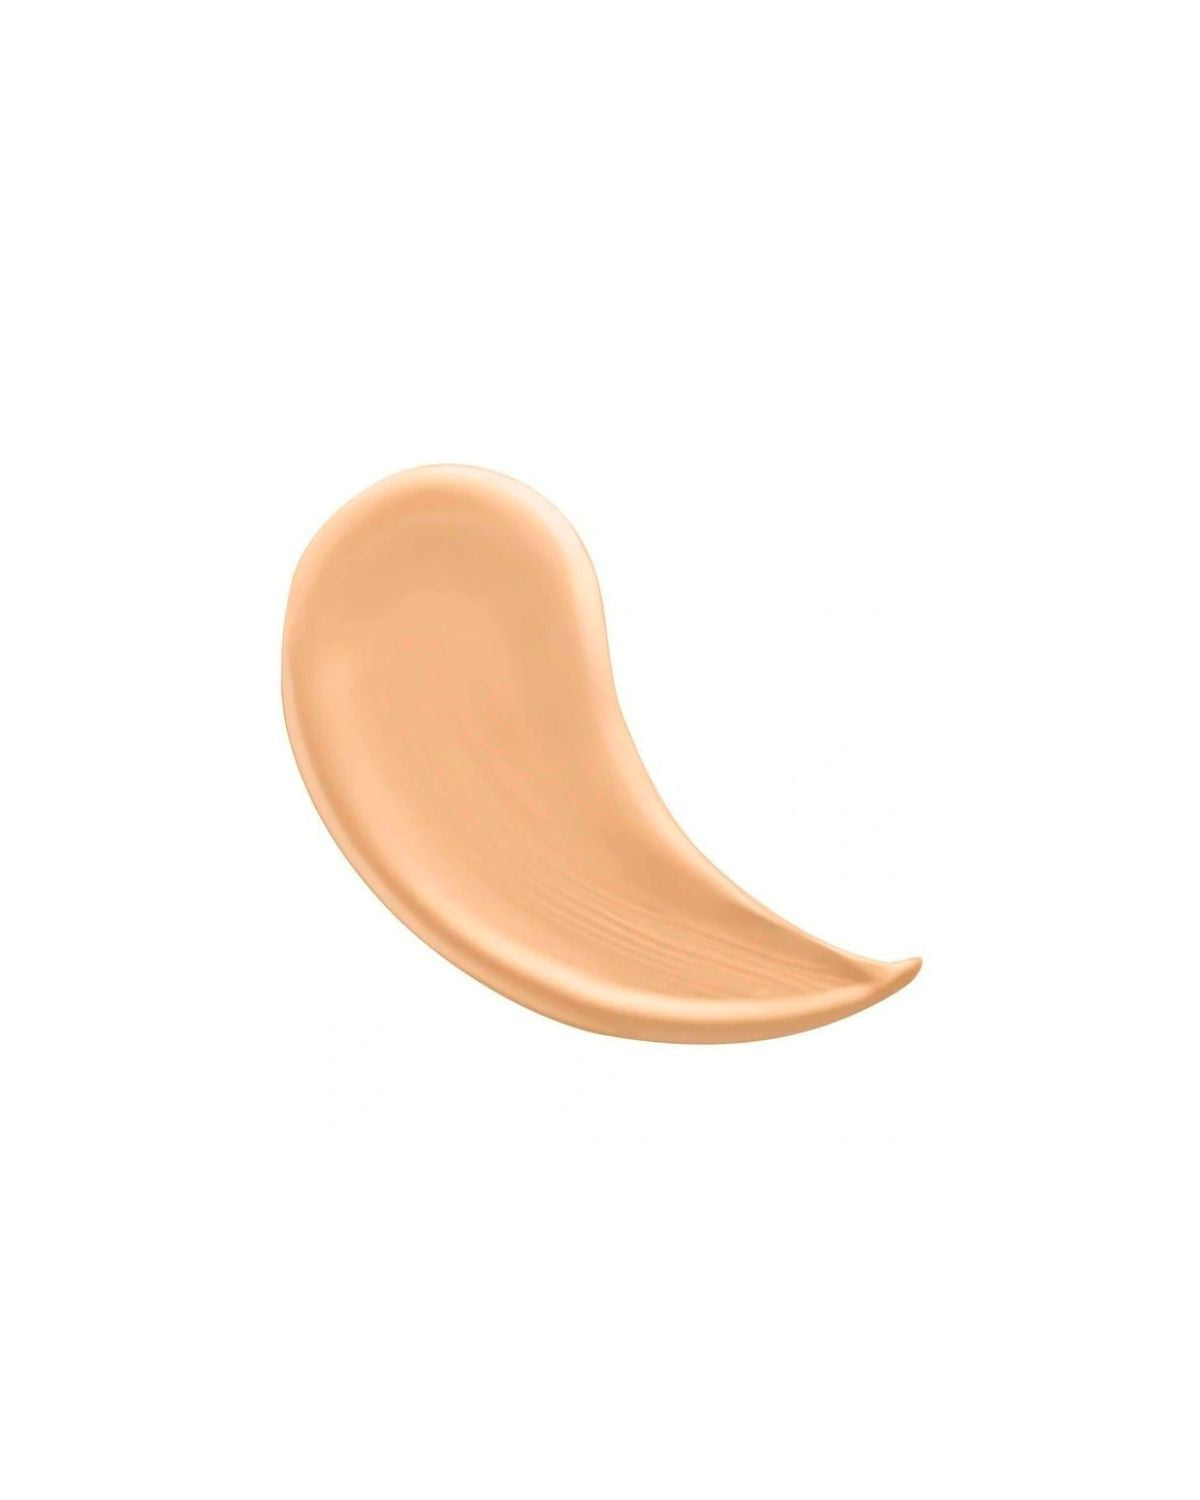 Absolue Smoothing Cushion Compact Foundation